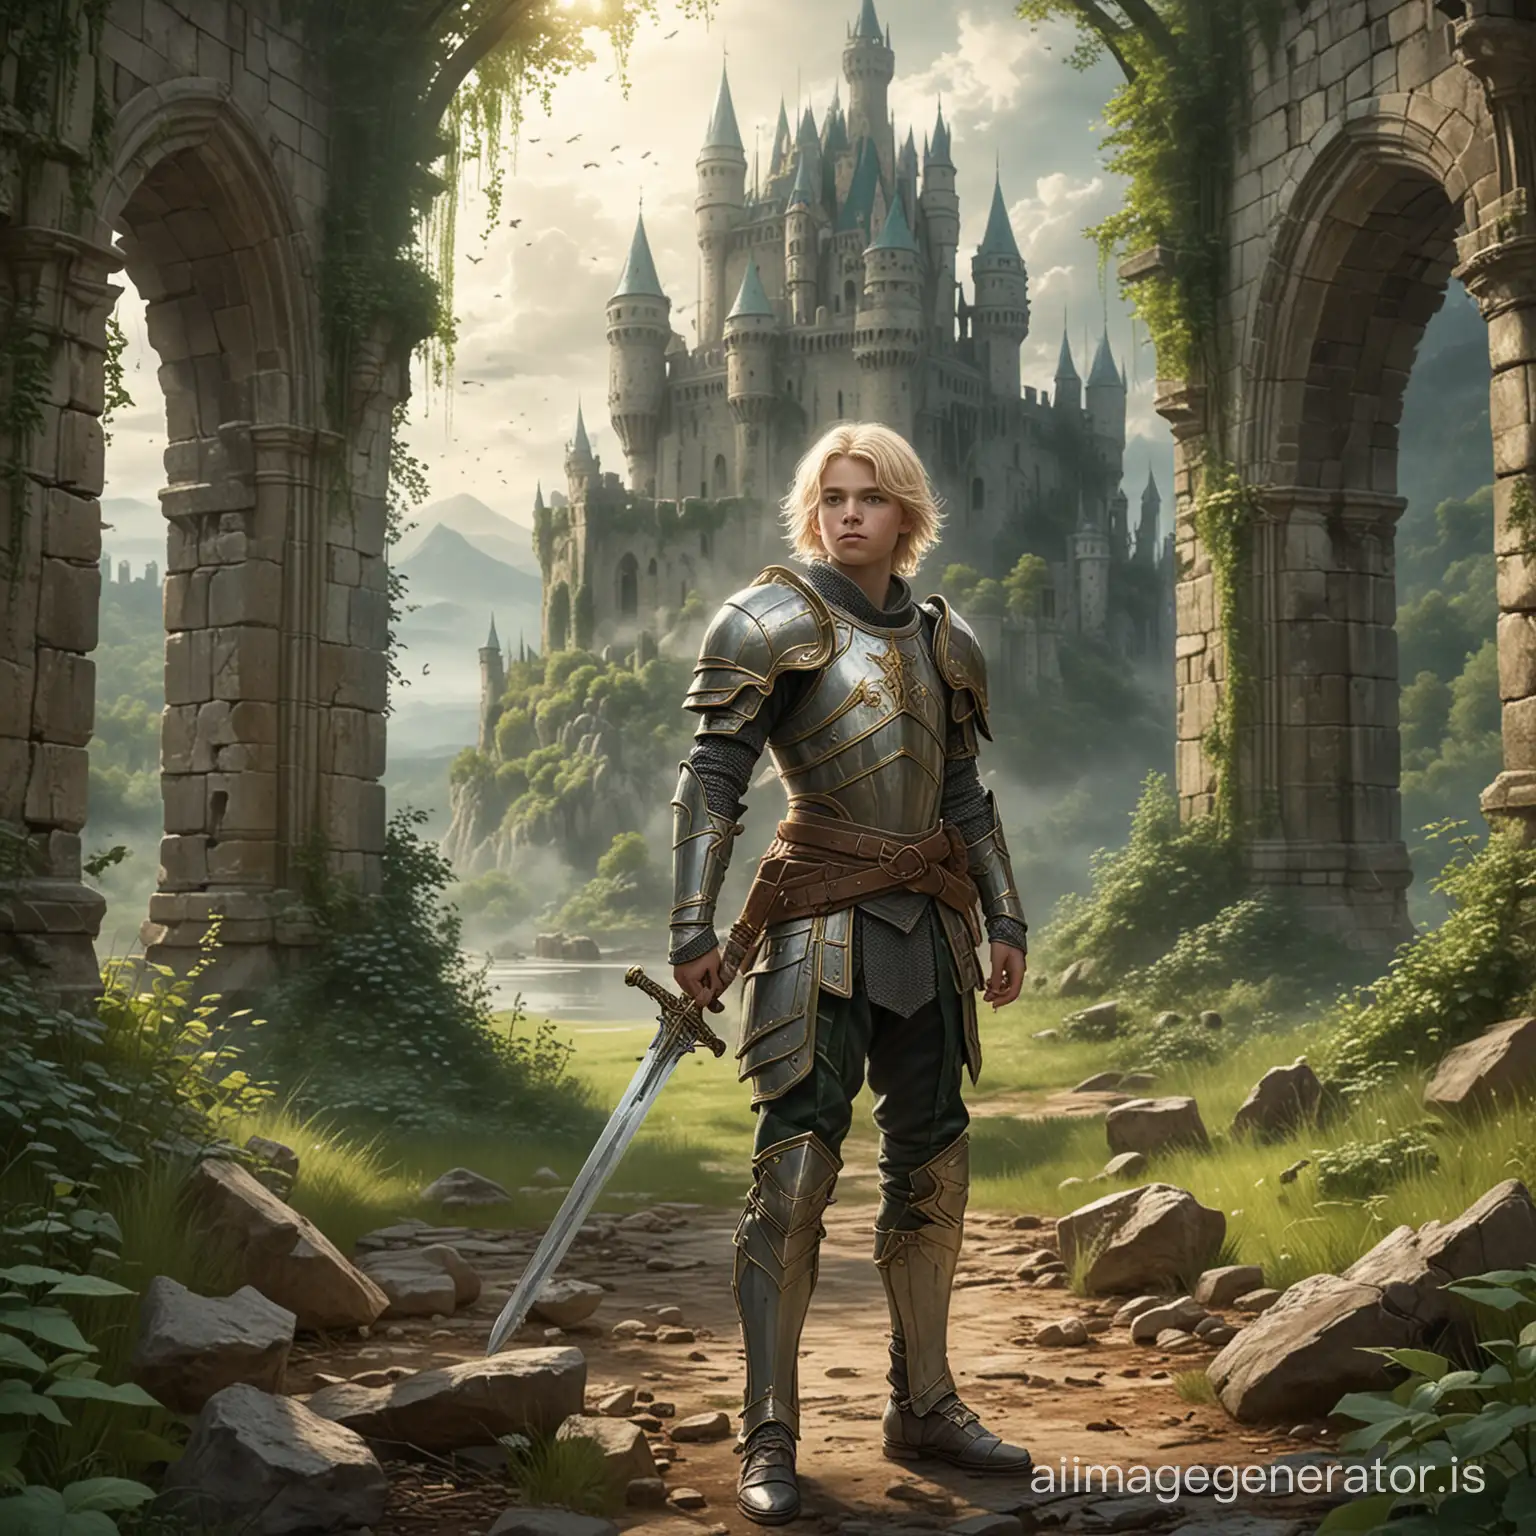 An illustration fantasy style of a blond 17 years old boy dressed on an armour holding a sword and in front of castle in ruins in a green forest